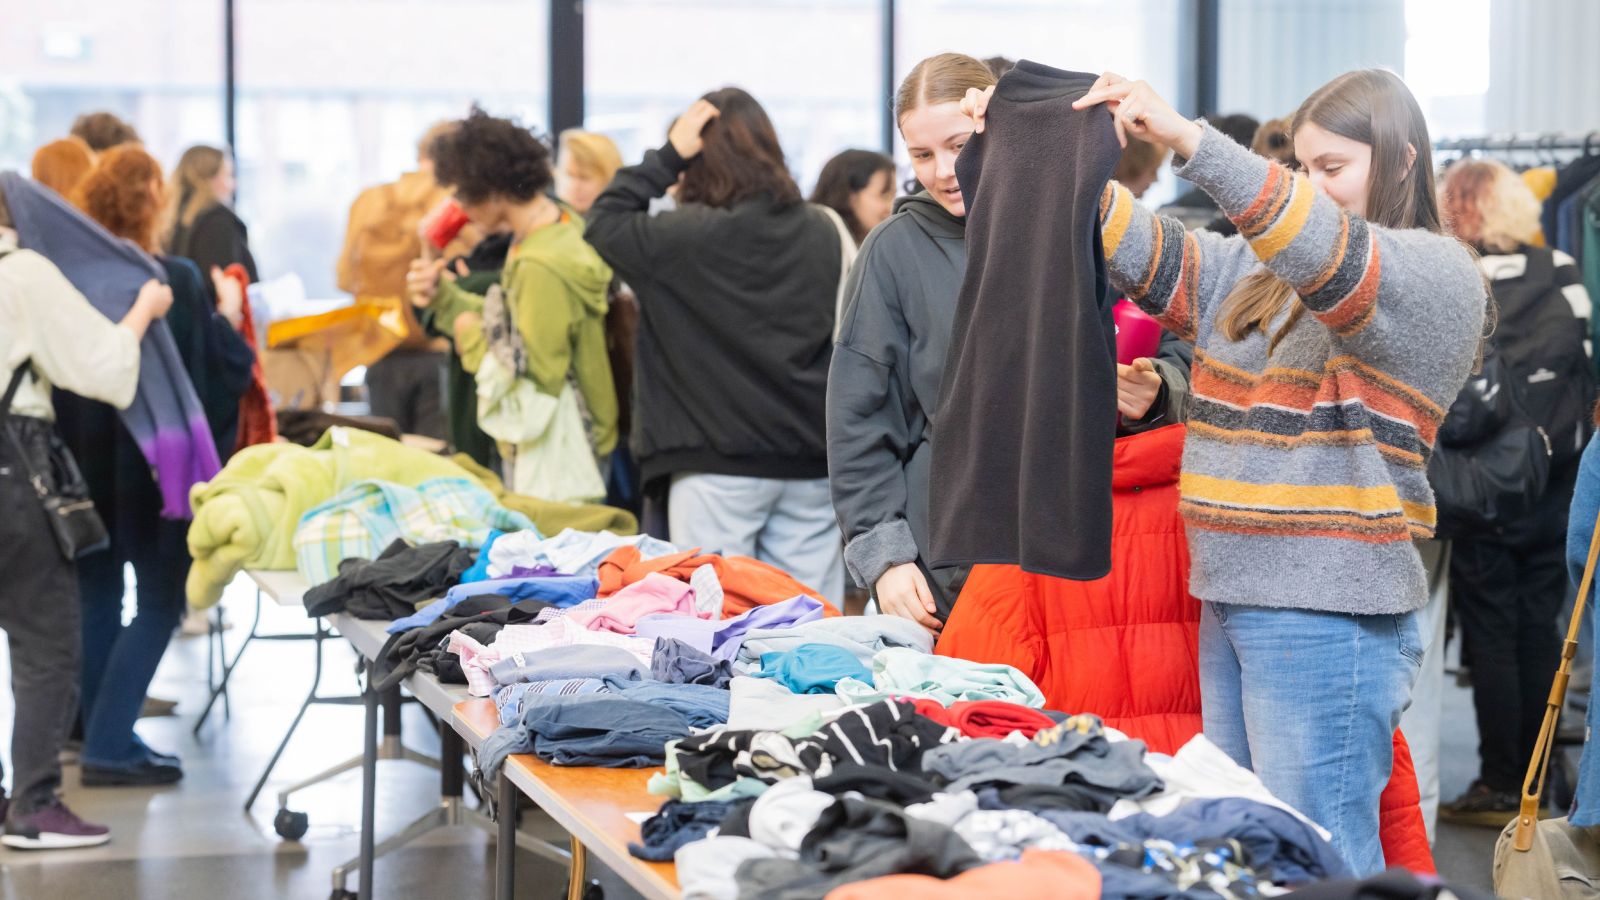 Two people select warm clothing at the clothing drive.